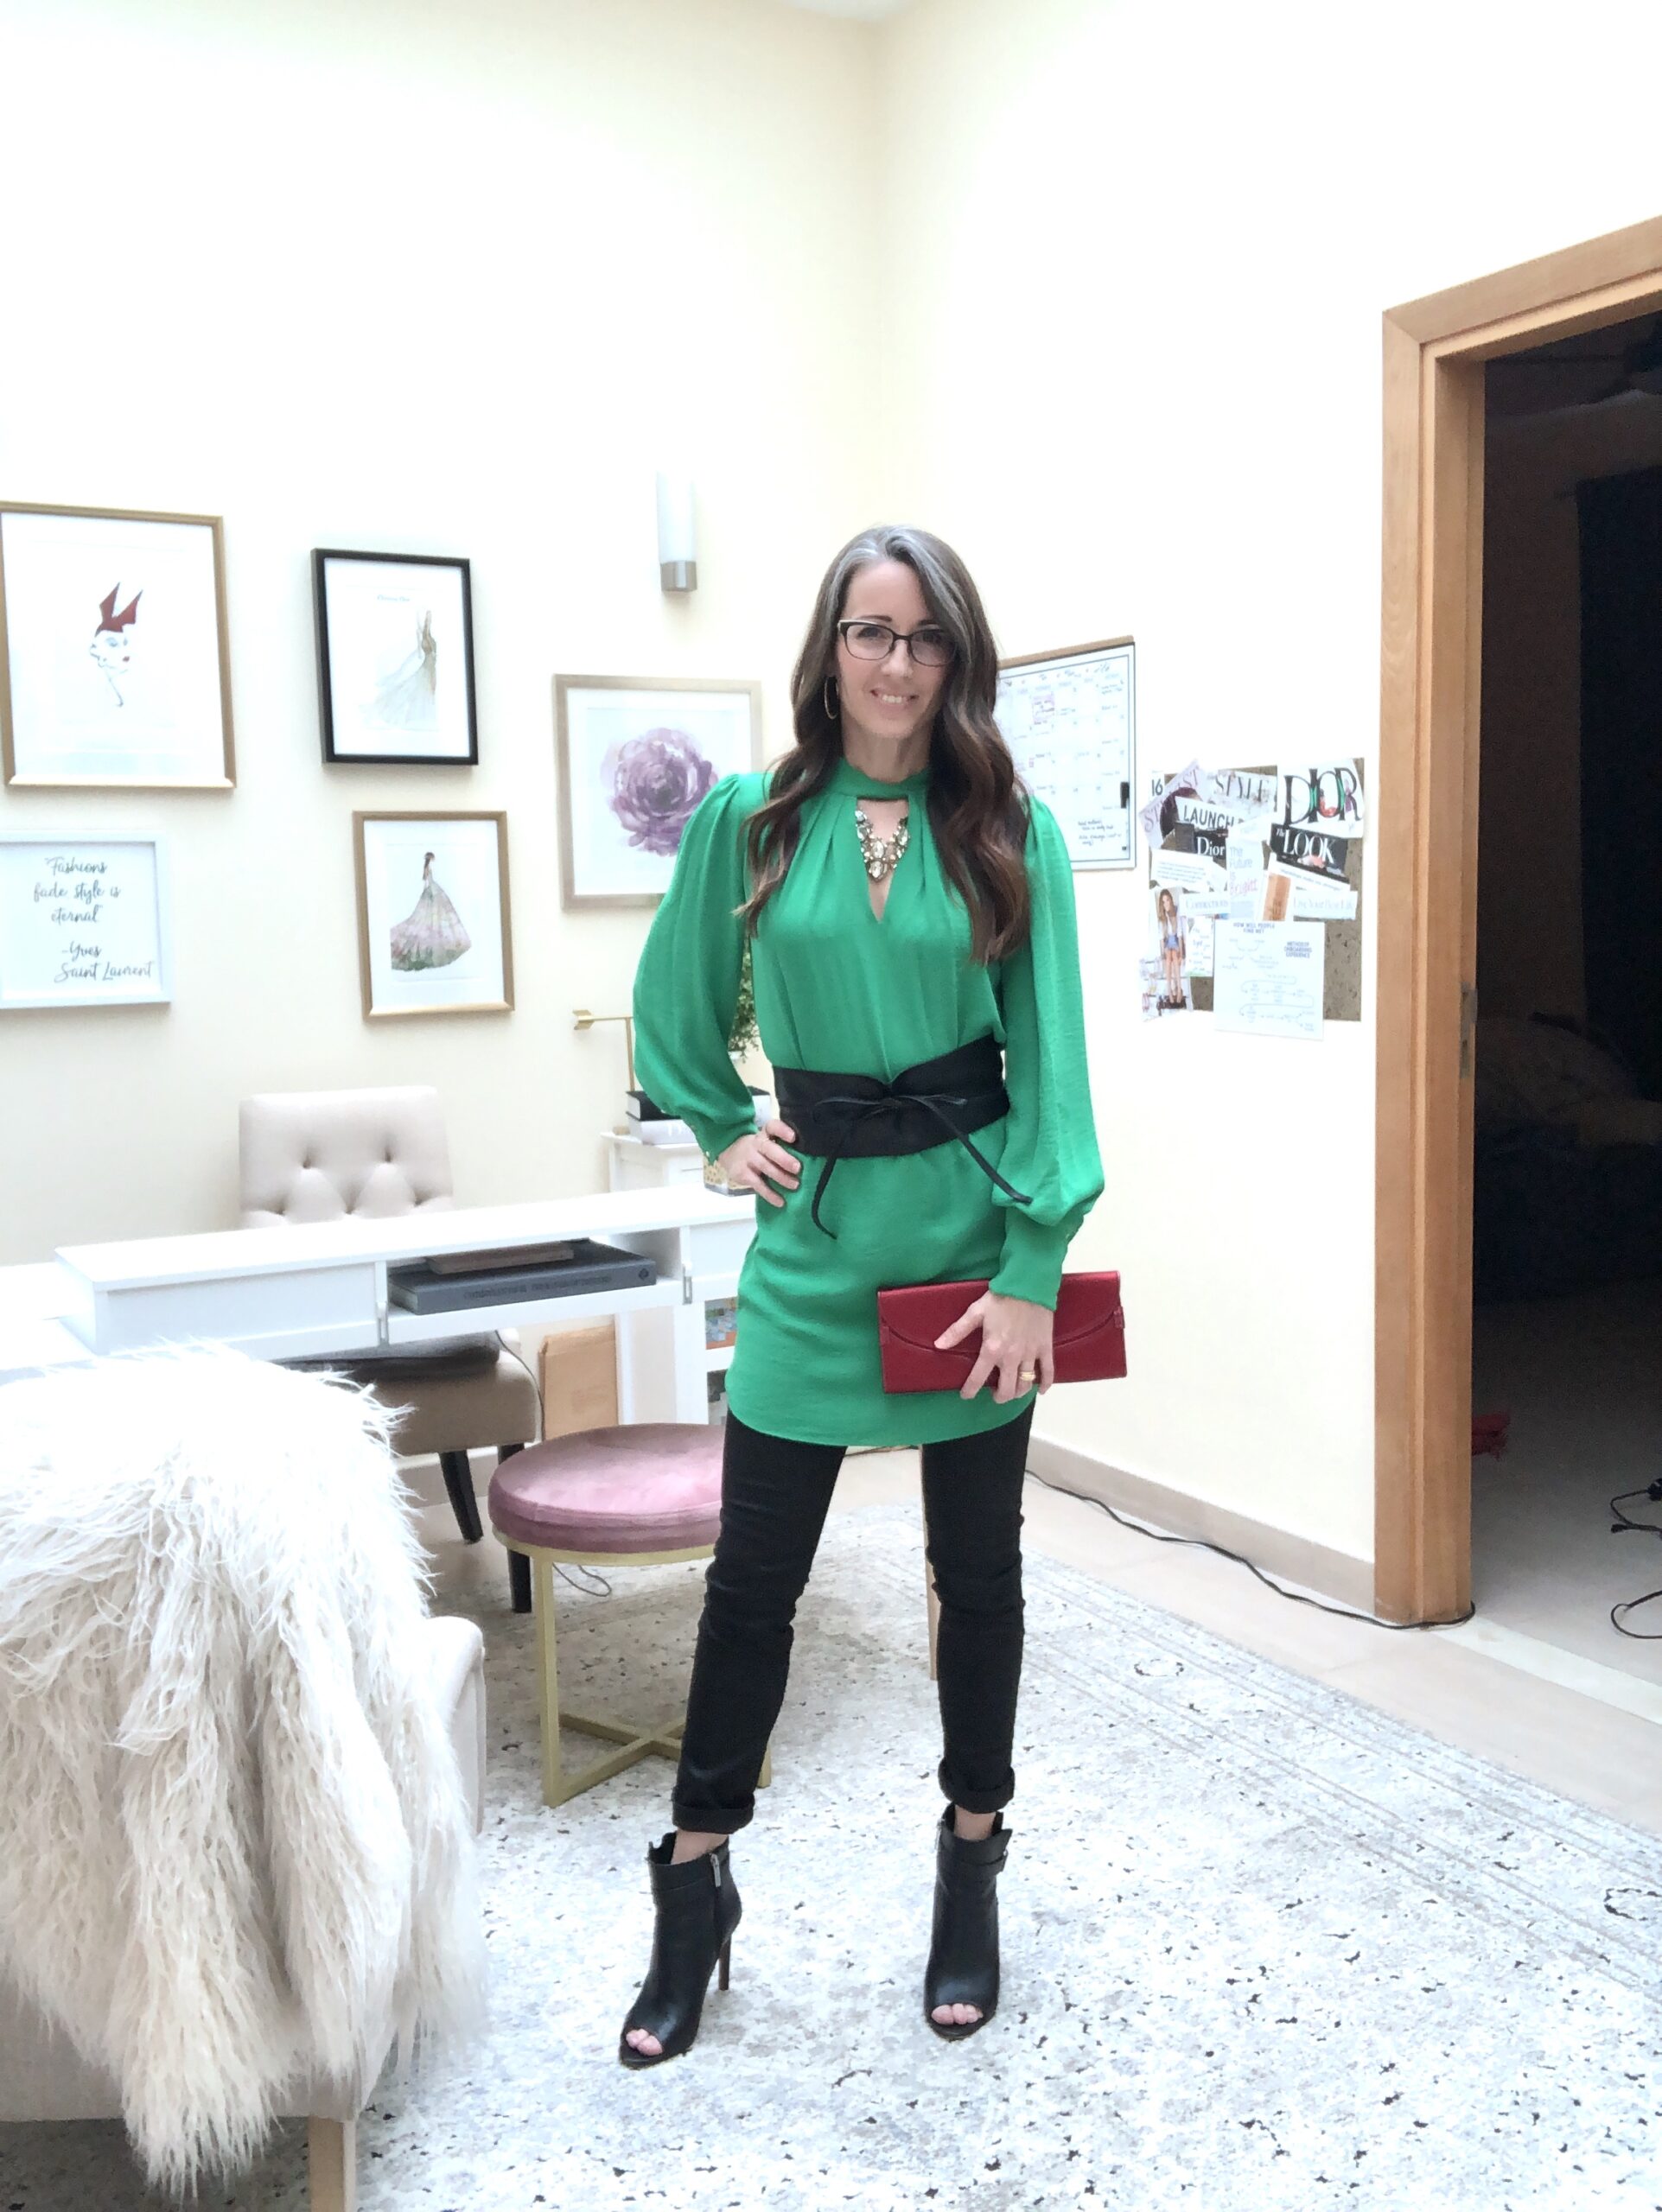 method39, style advice, style advisor, find your style, wardrobe, versatility, finish the look, accessorize, casual, everyday style, dressed up, green dress, six ways, styled by me, wear it, dress up, everyday style, layers